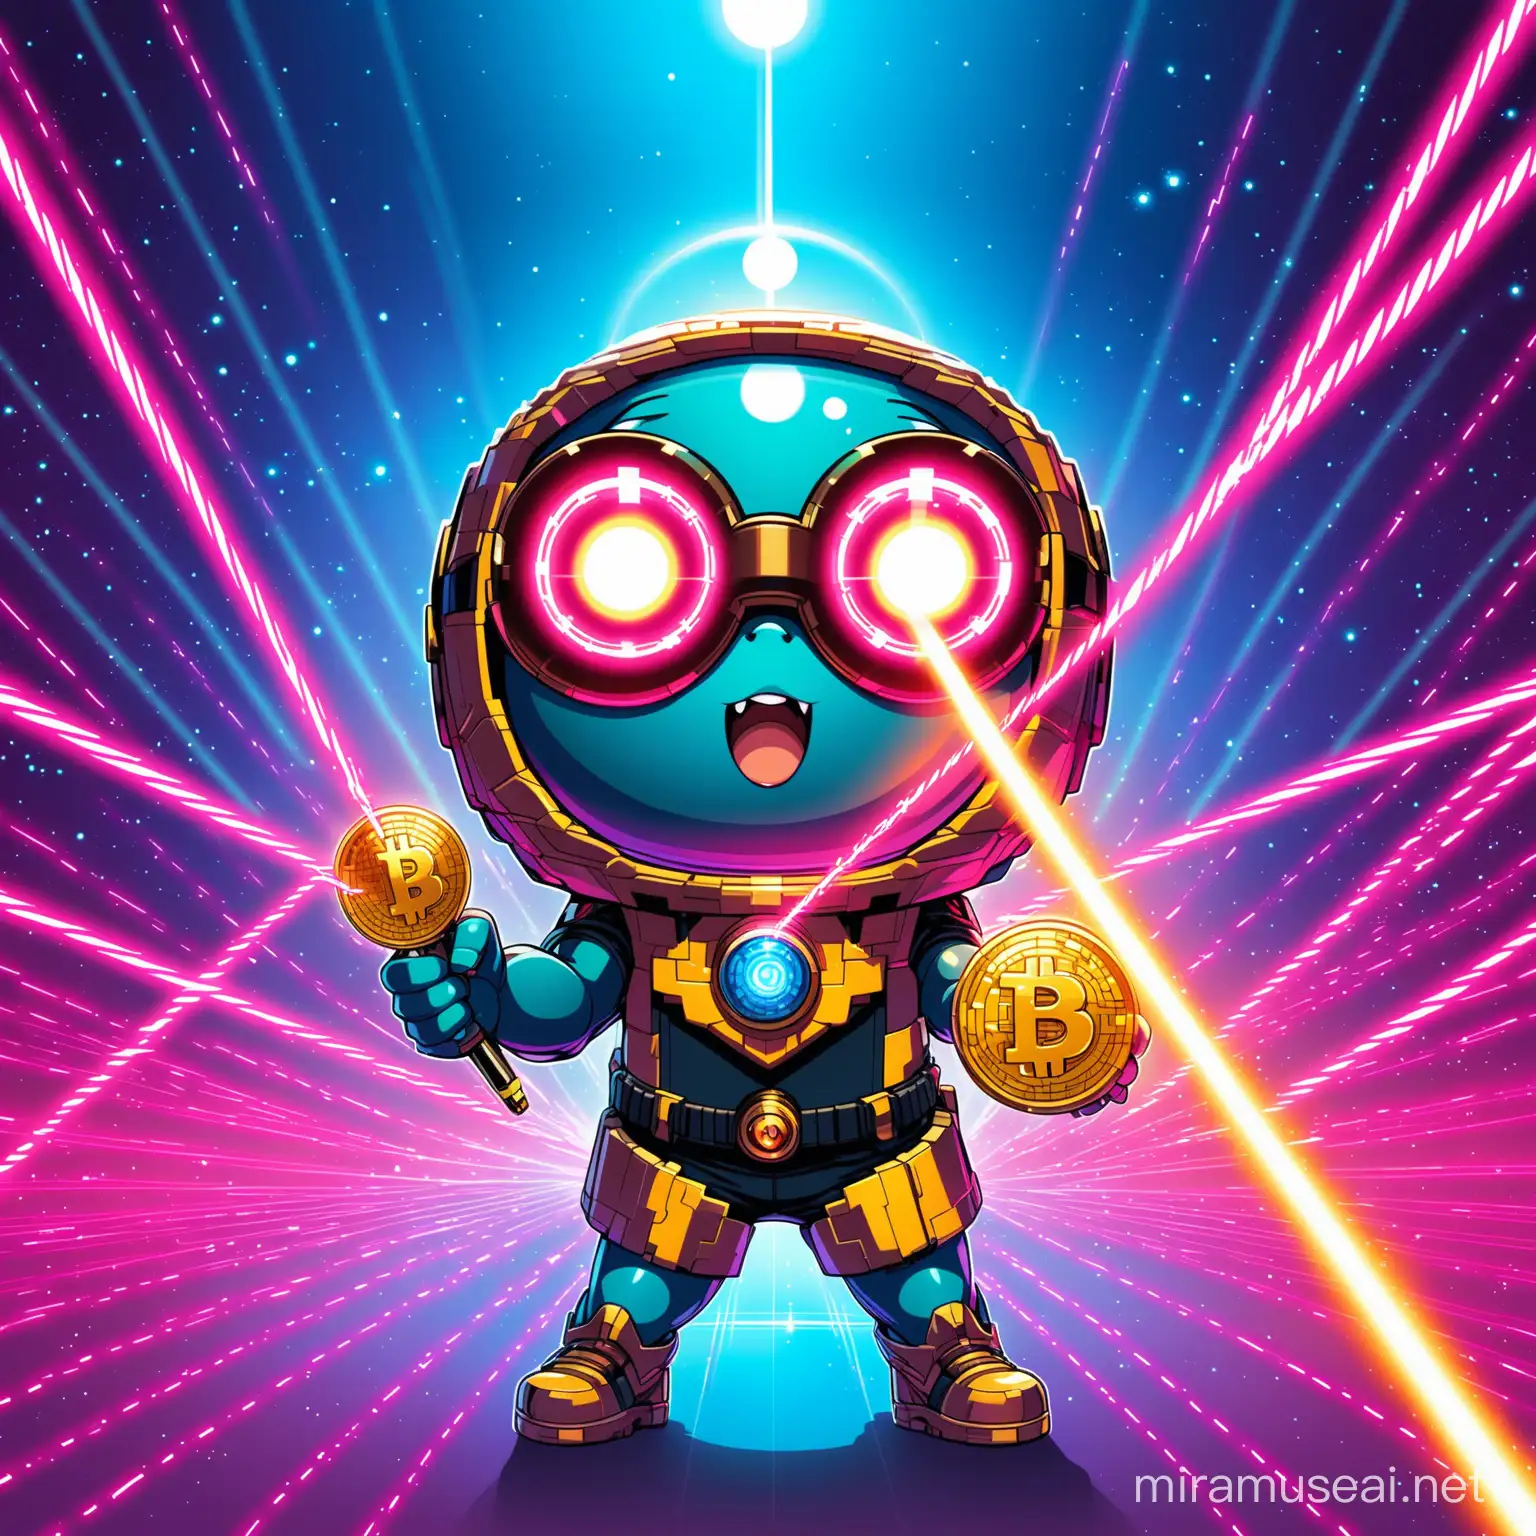 CryptocurrencyThemed Hero with Luminous Ocular Abilities